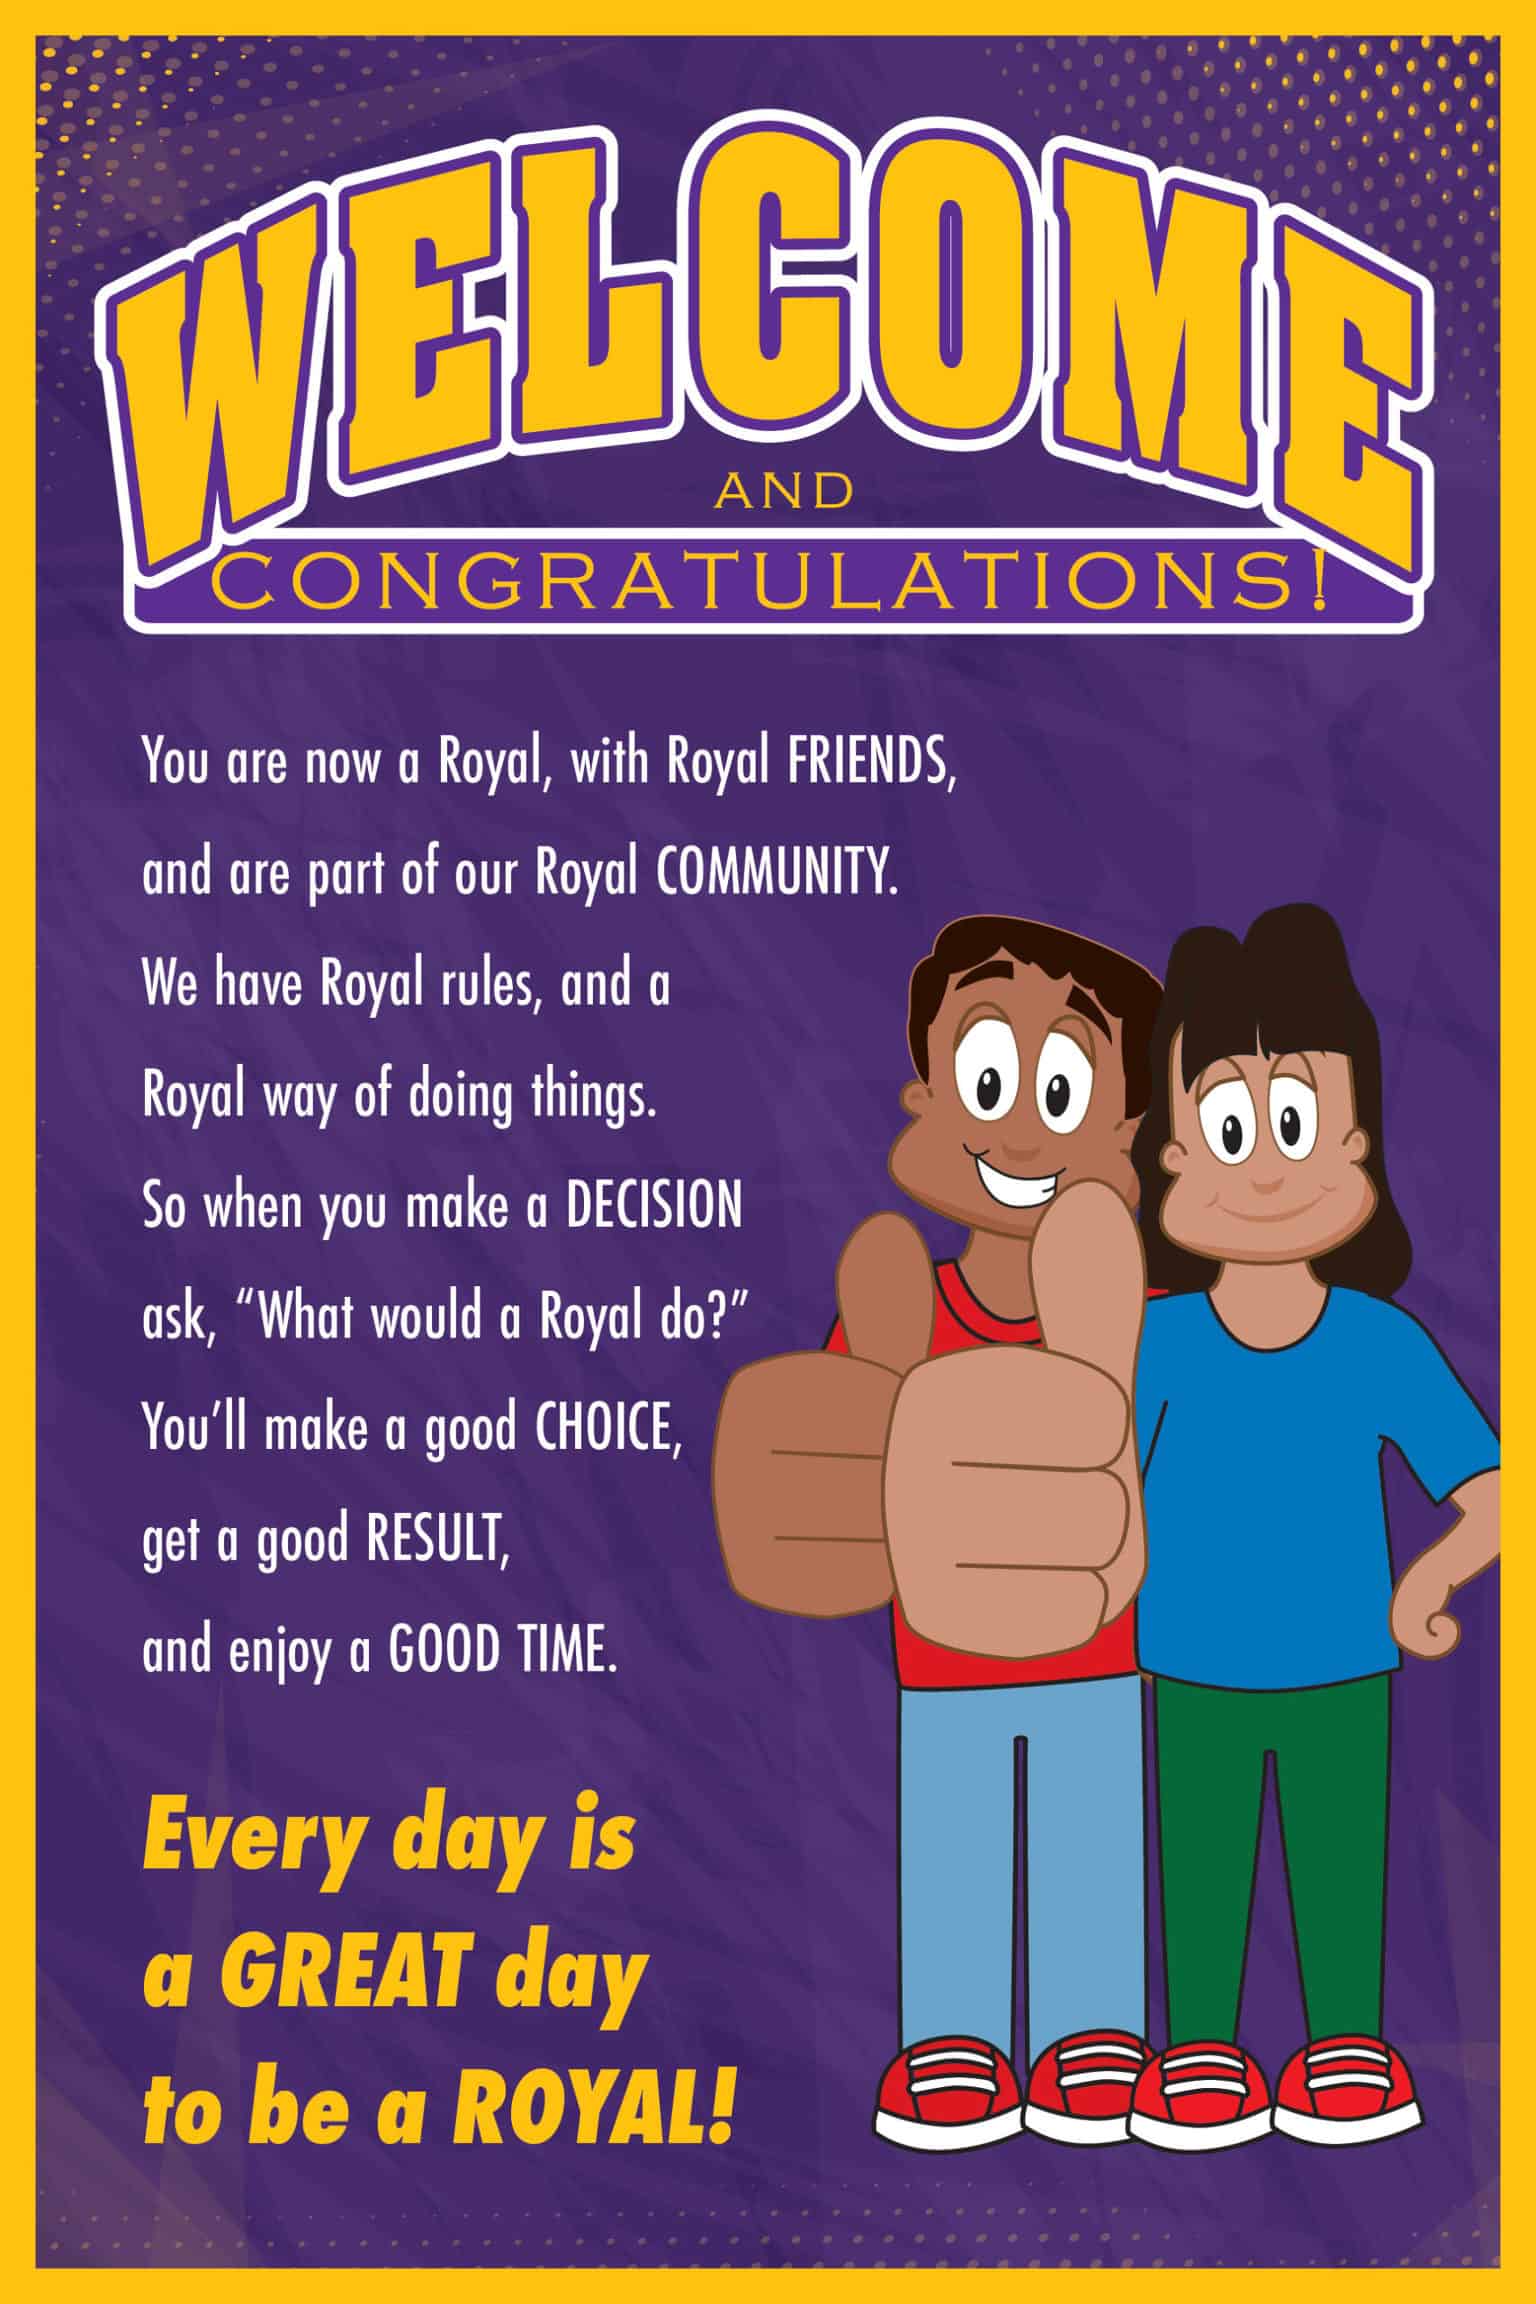 welcome-message-poster-royals